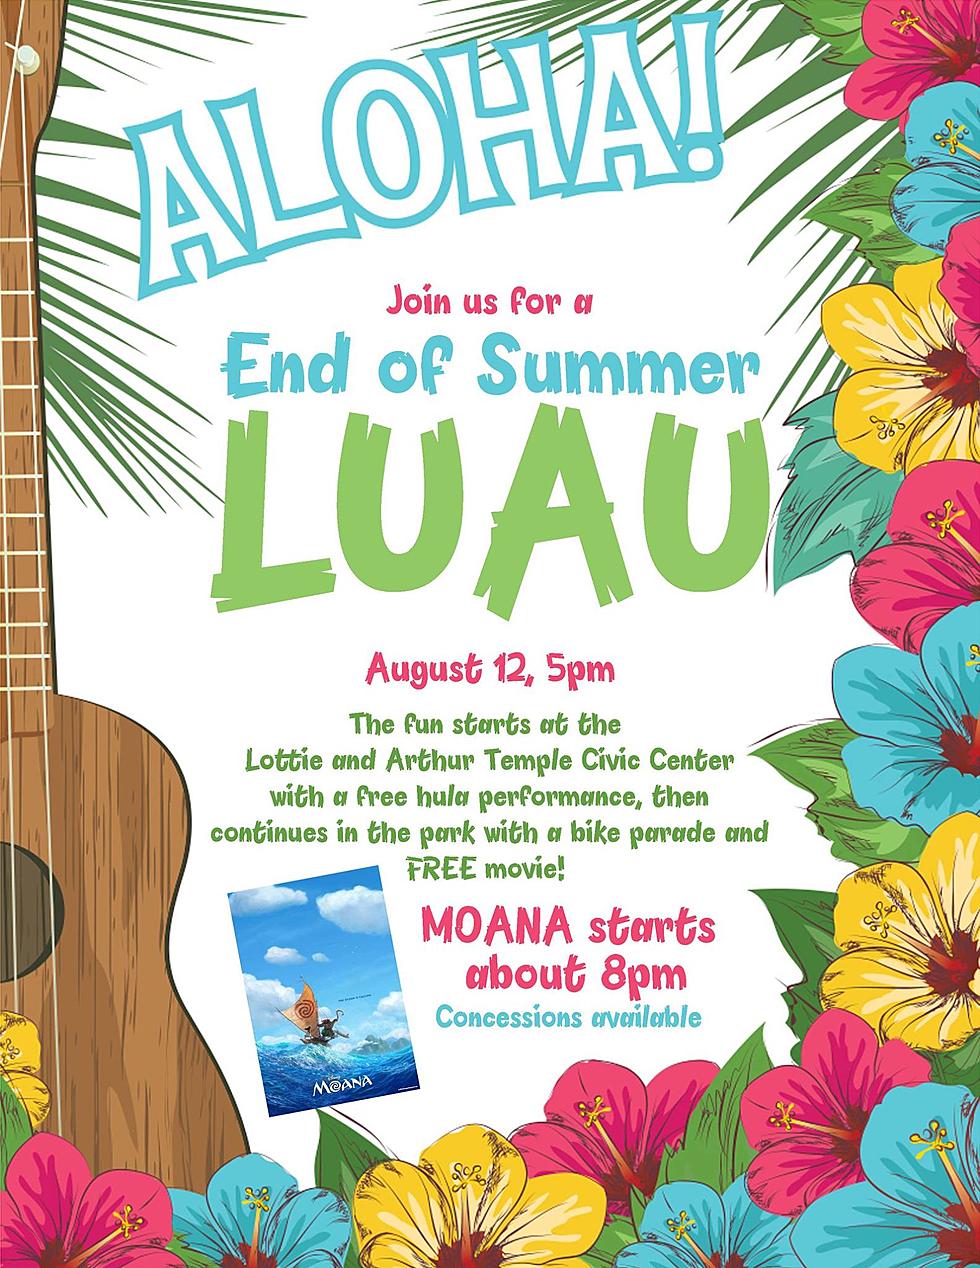 Experience The End-of-Summer Luau With Moana